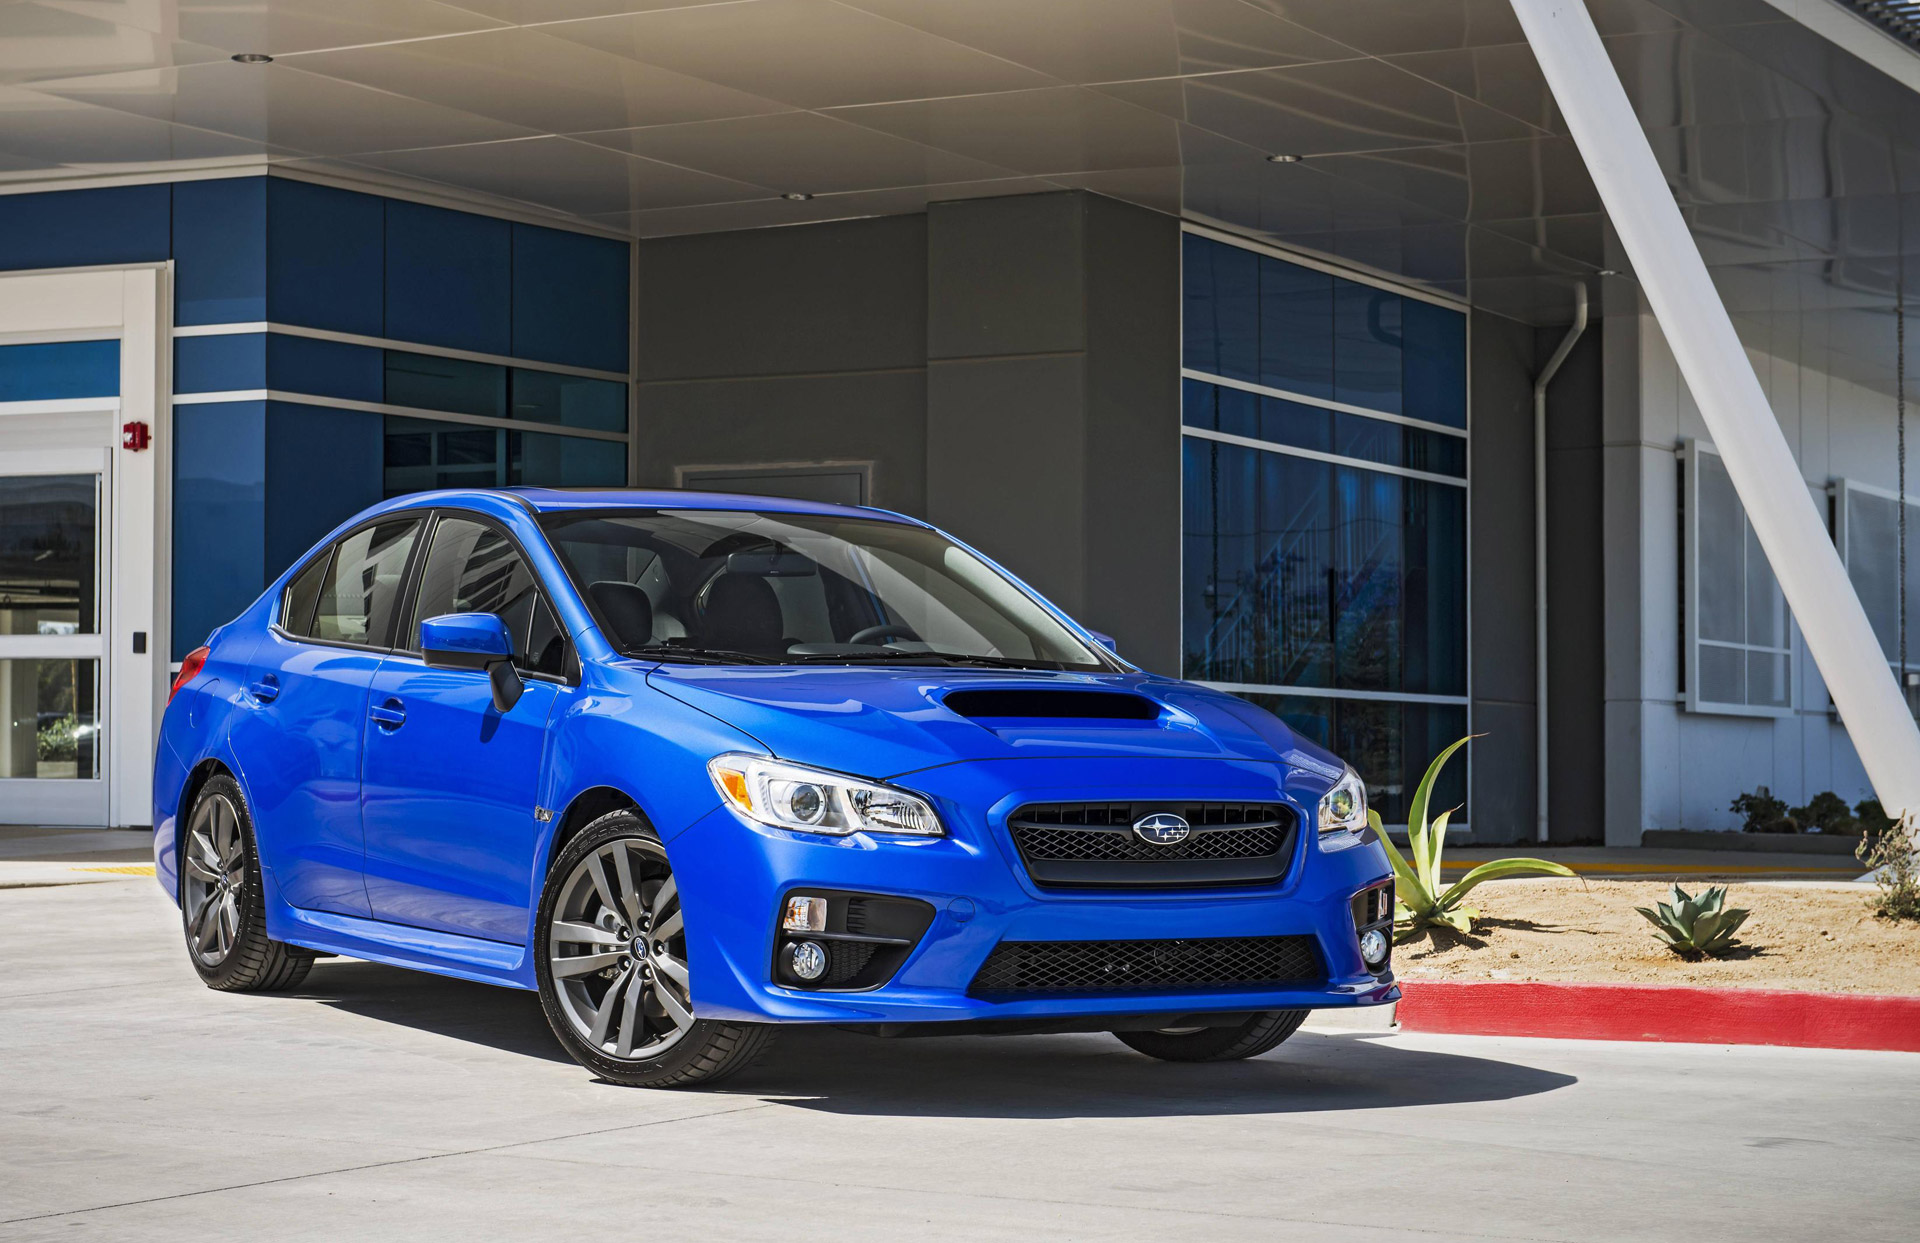 2016 Subaru WRX And WRX STI Benefit From More Safety Tech, Premium Features